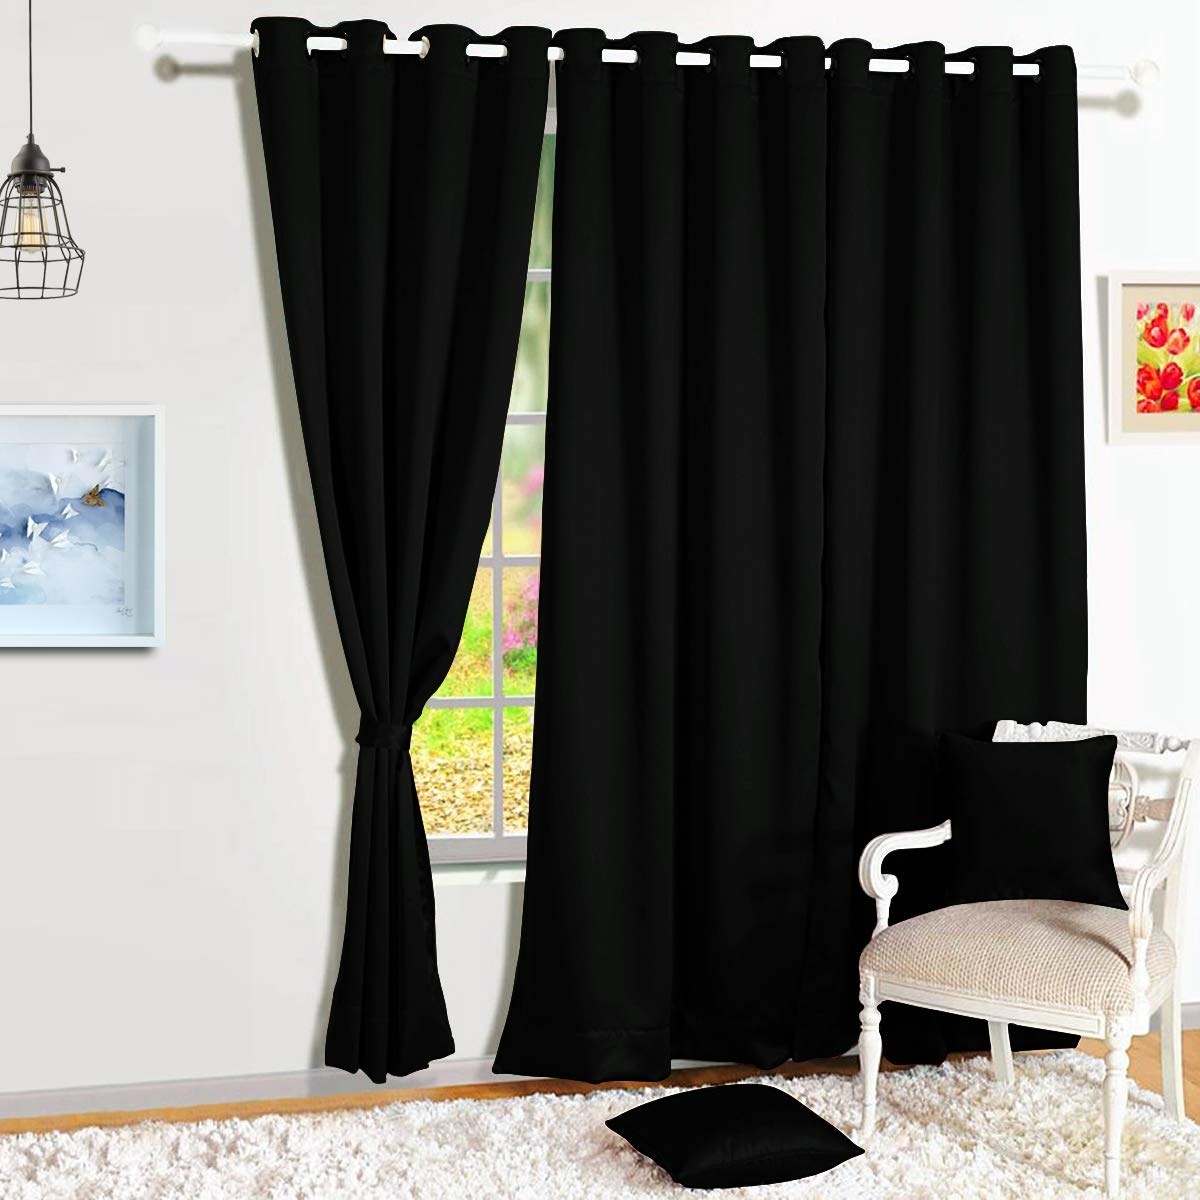 A set of blackout curtains near a window with black pillows on a chair